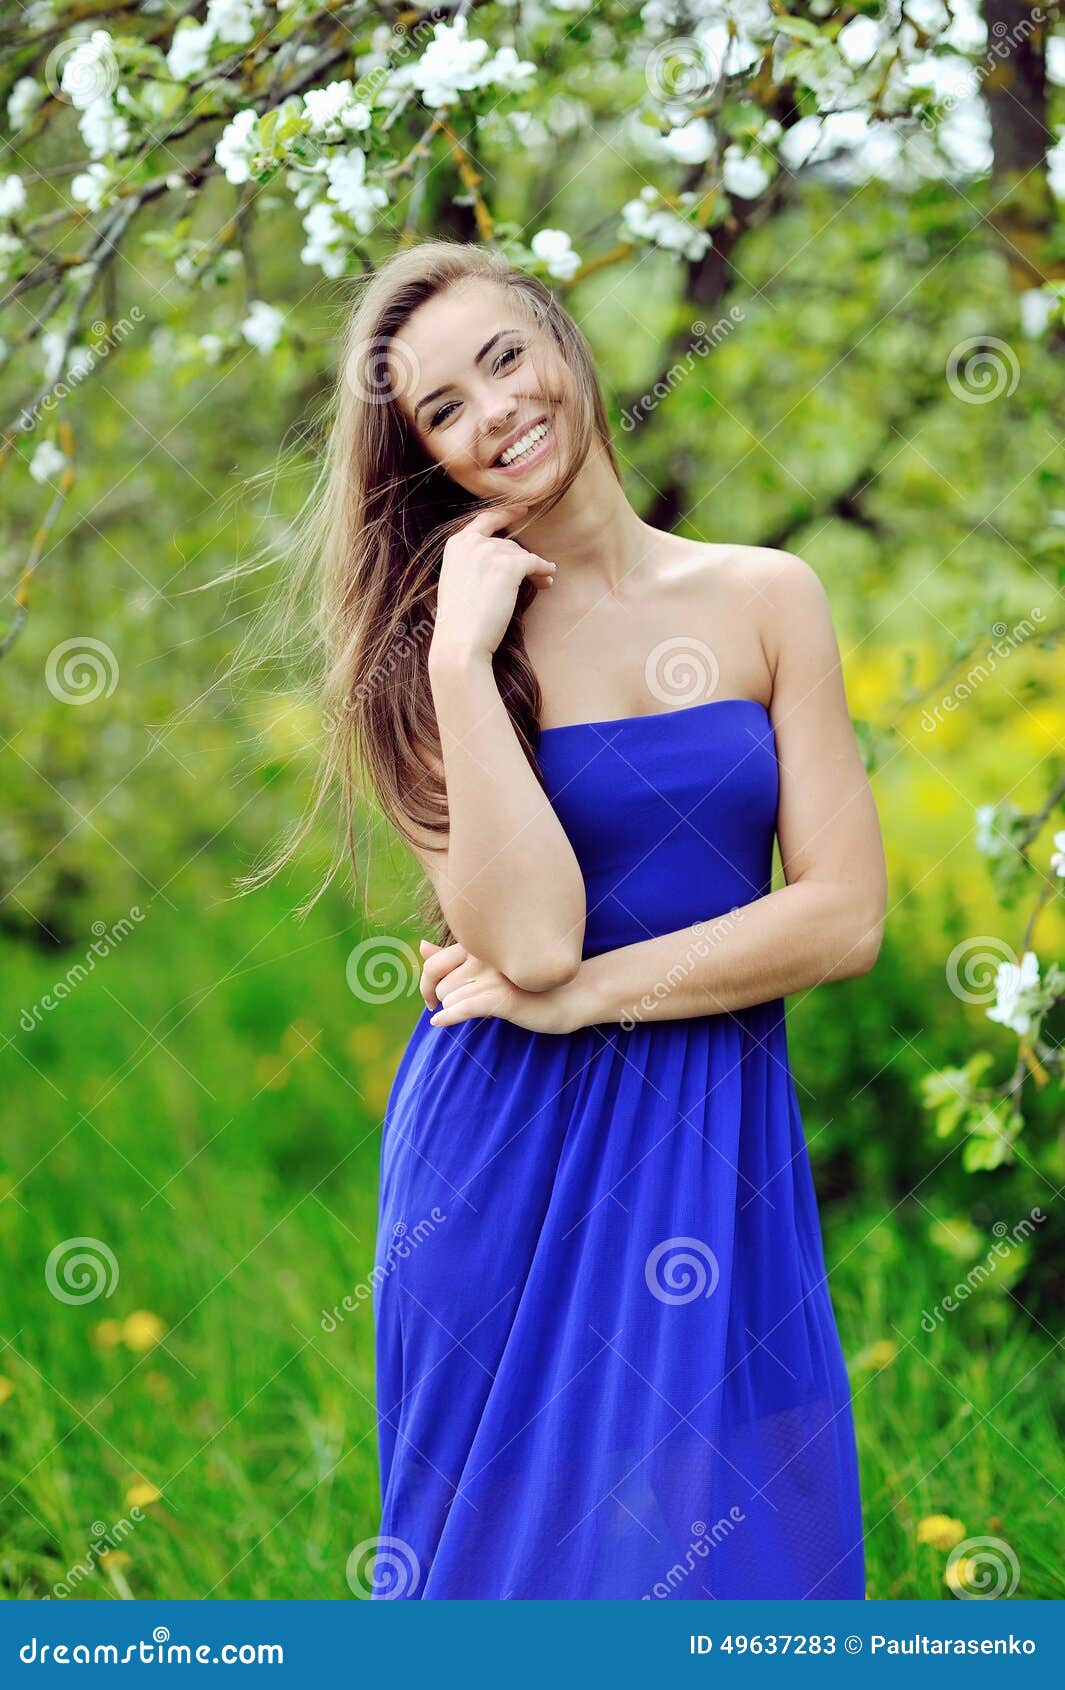 Young Smiling Woman Outdoors Portrait Stock Image - Image of hairstyle ...